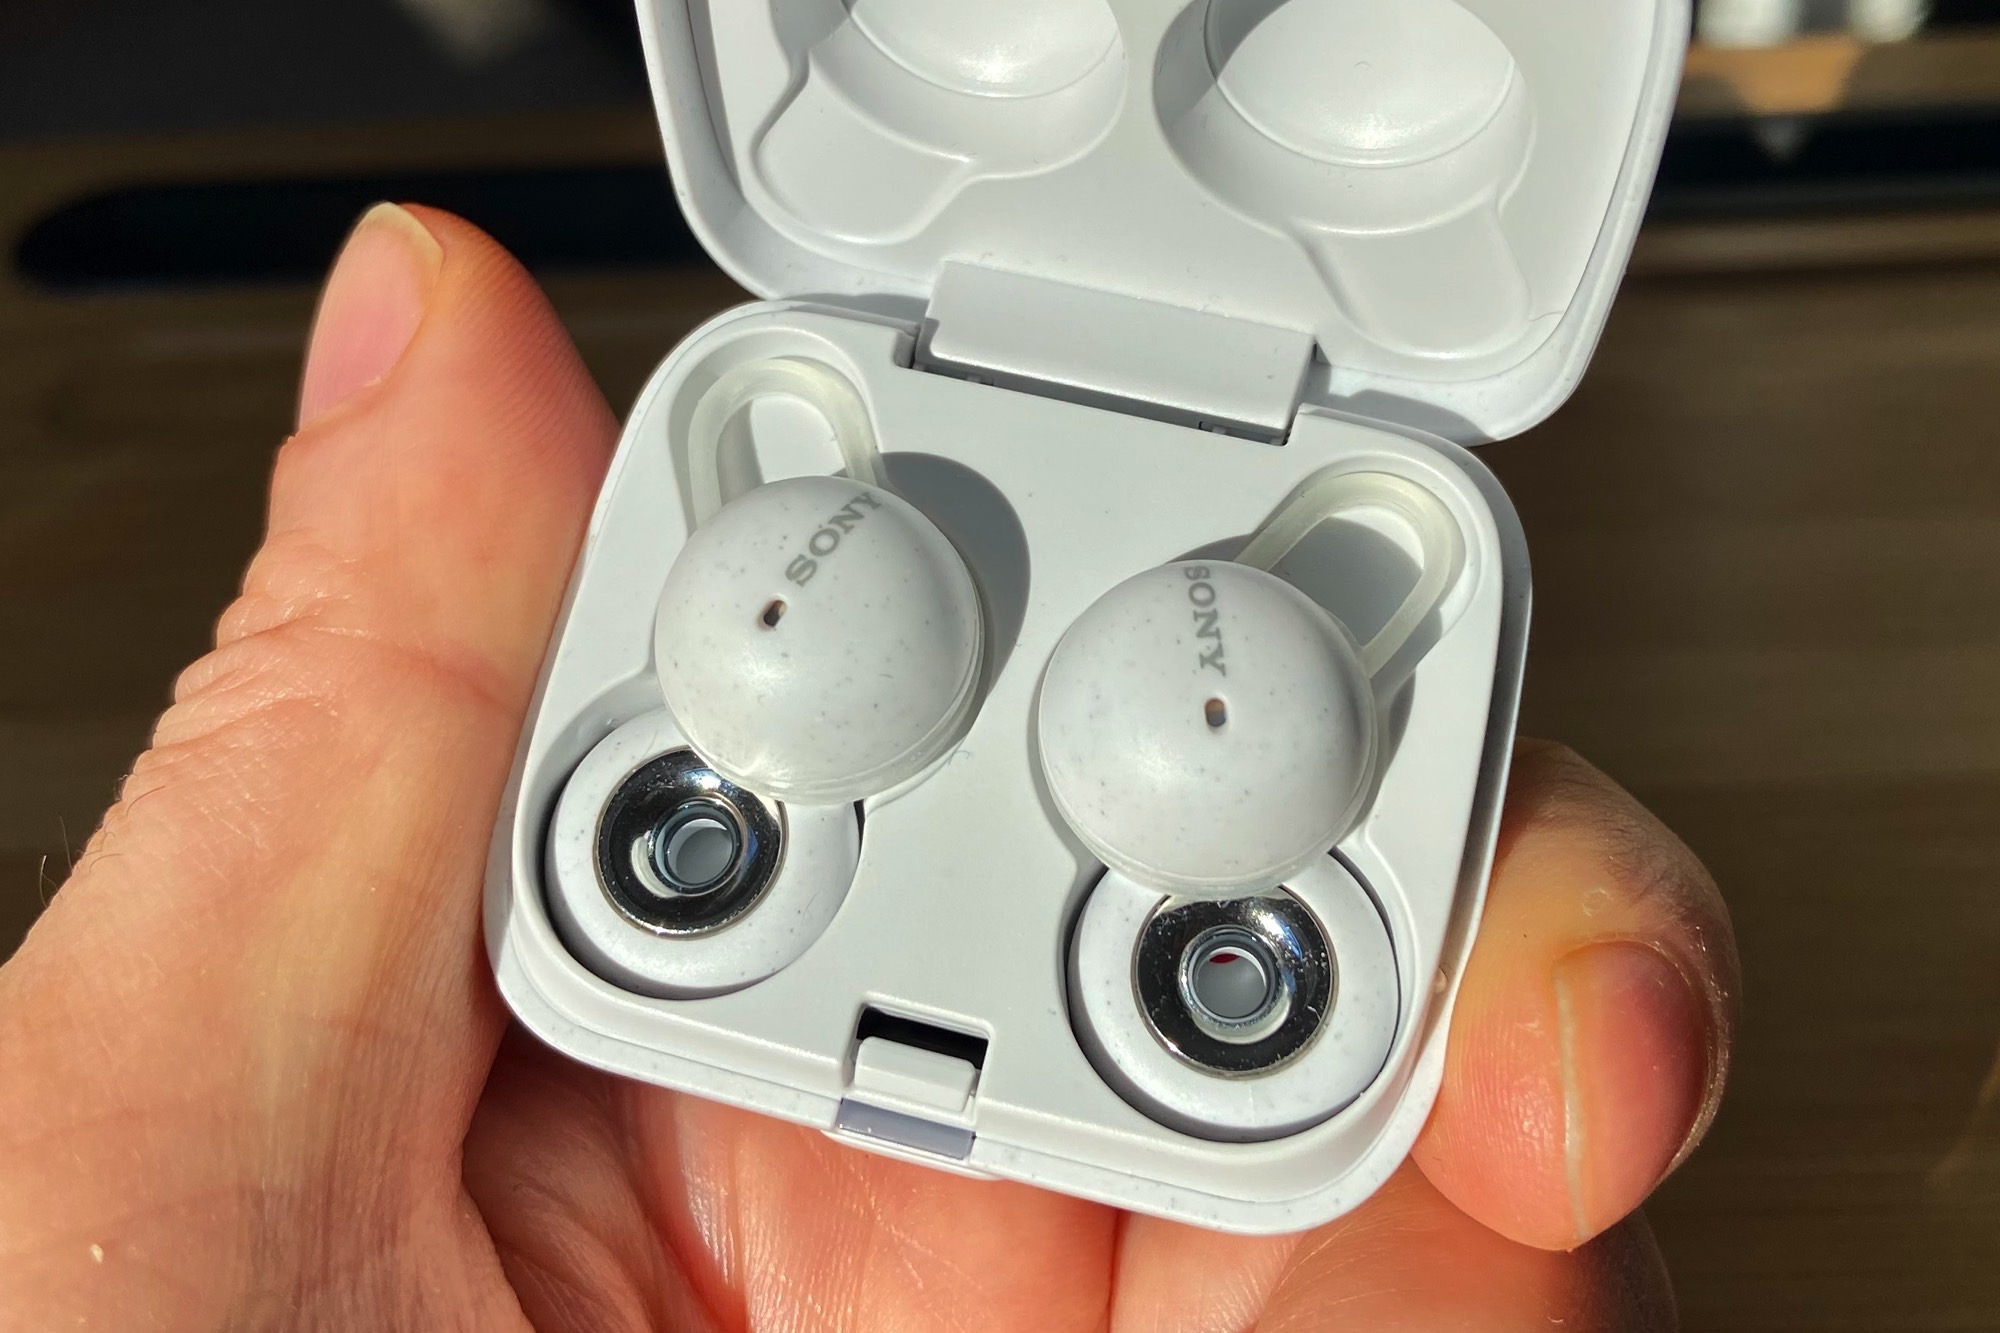 Sony LinkBuds Review: Next-Level Open Earbuds - Video - CNET